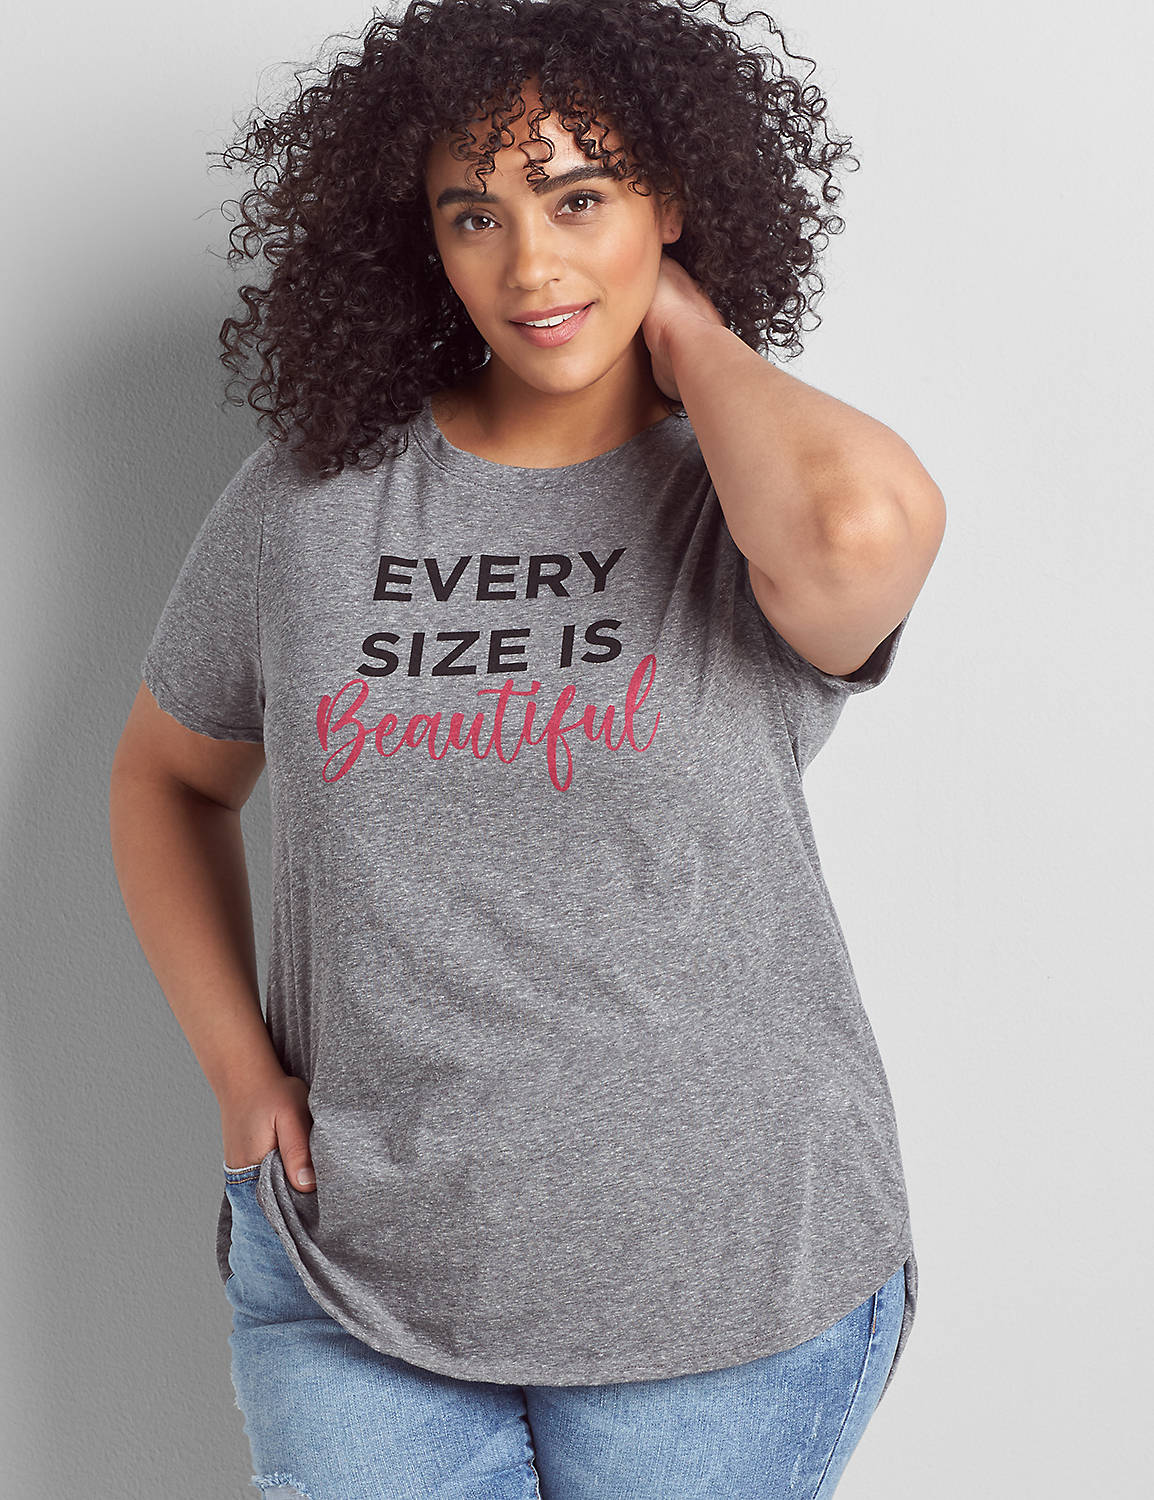 SS Crew-Neck Curved Hem HiLo Graphic: Every Size Is Beautiful 1123290:BTC30 Medium Heather Gray:14/16 Product Image 1